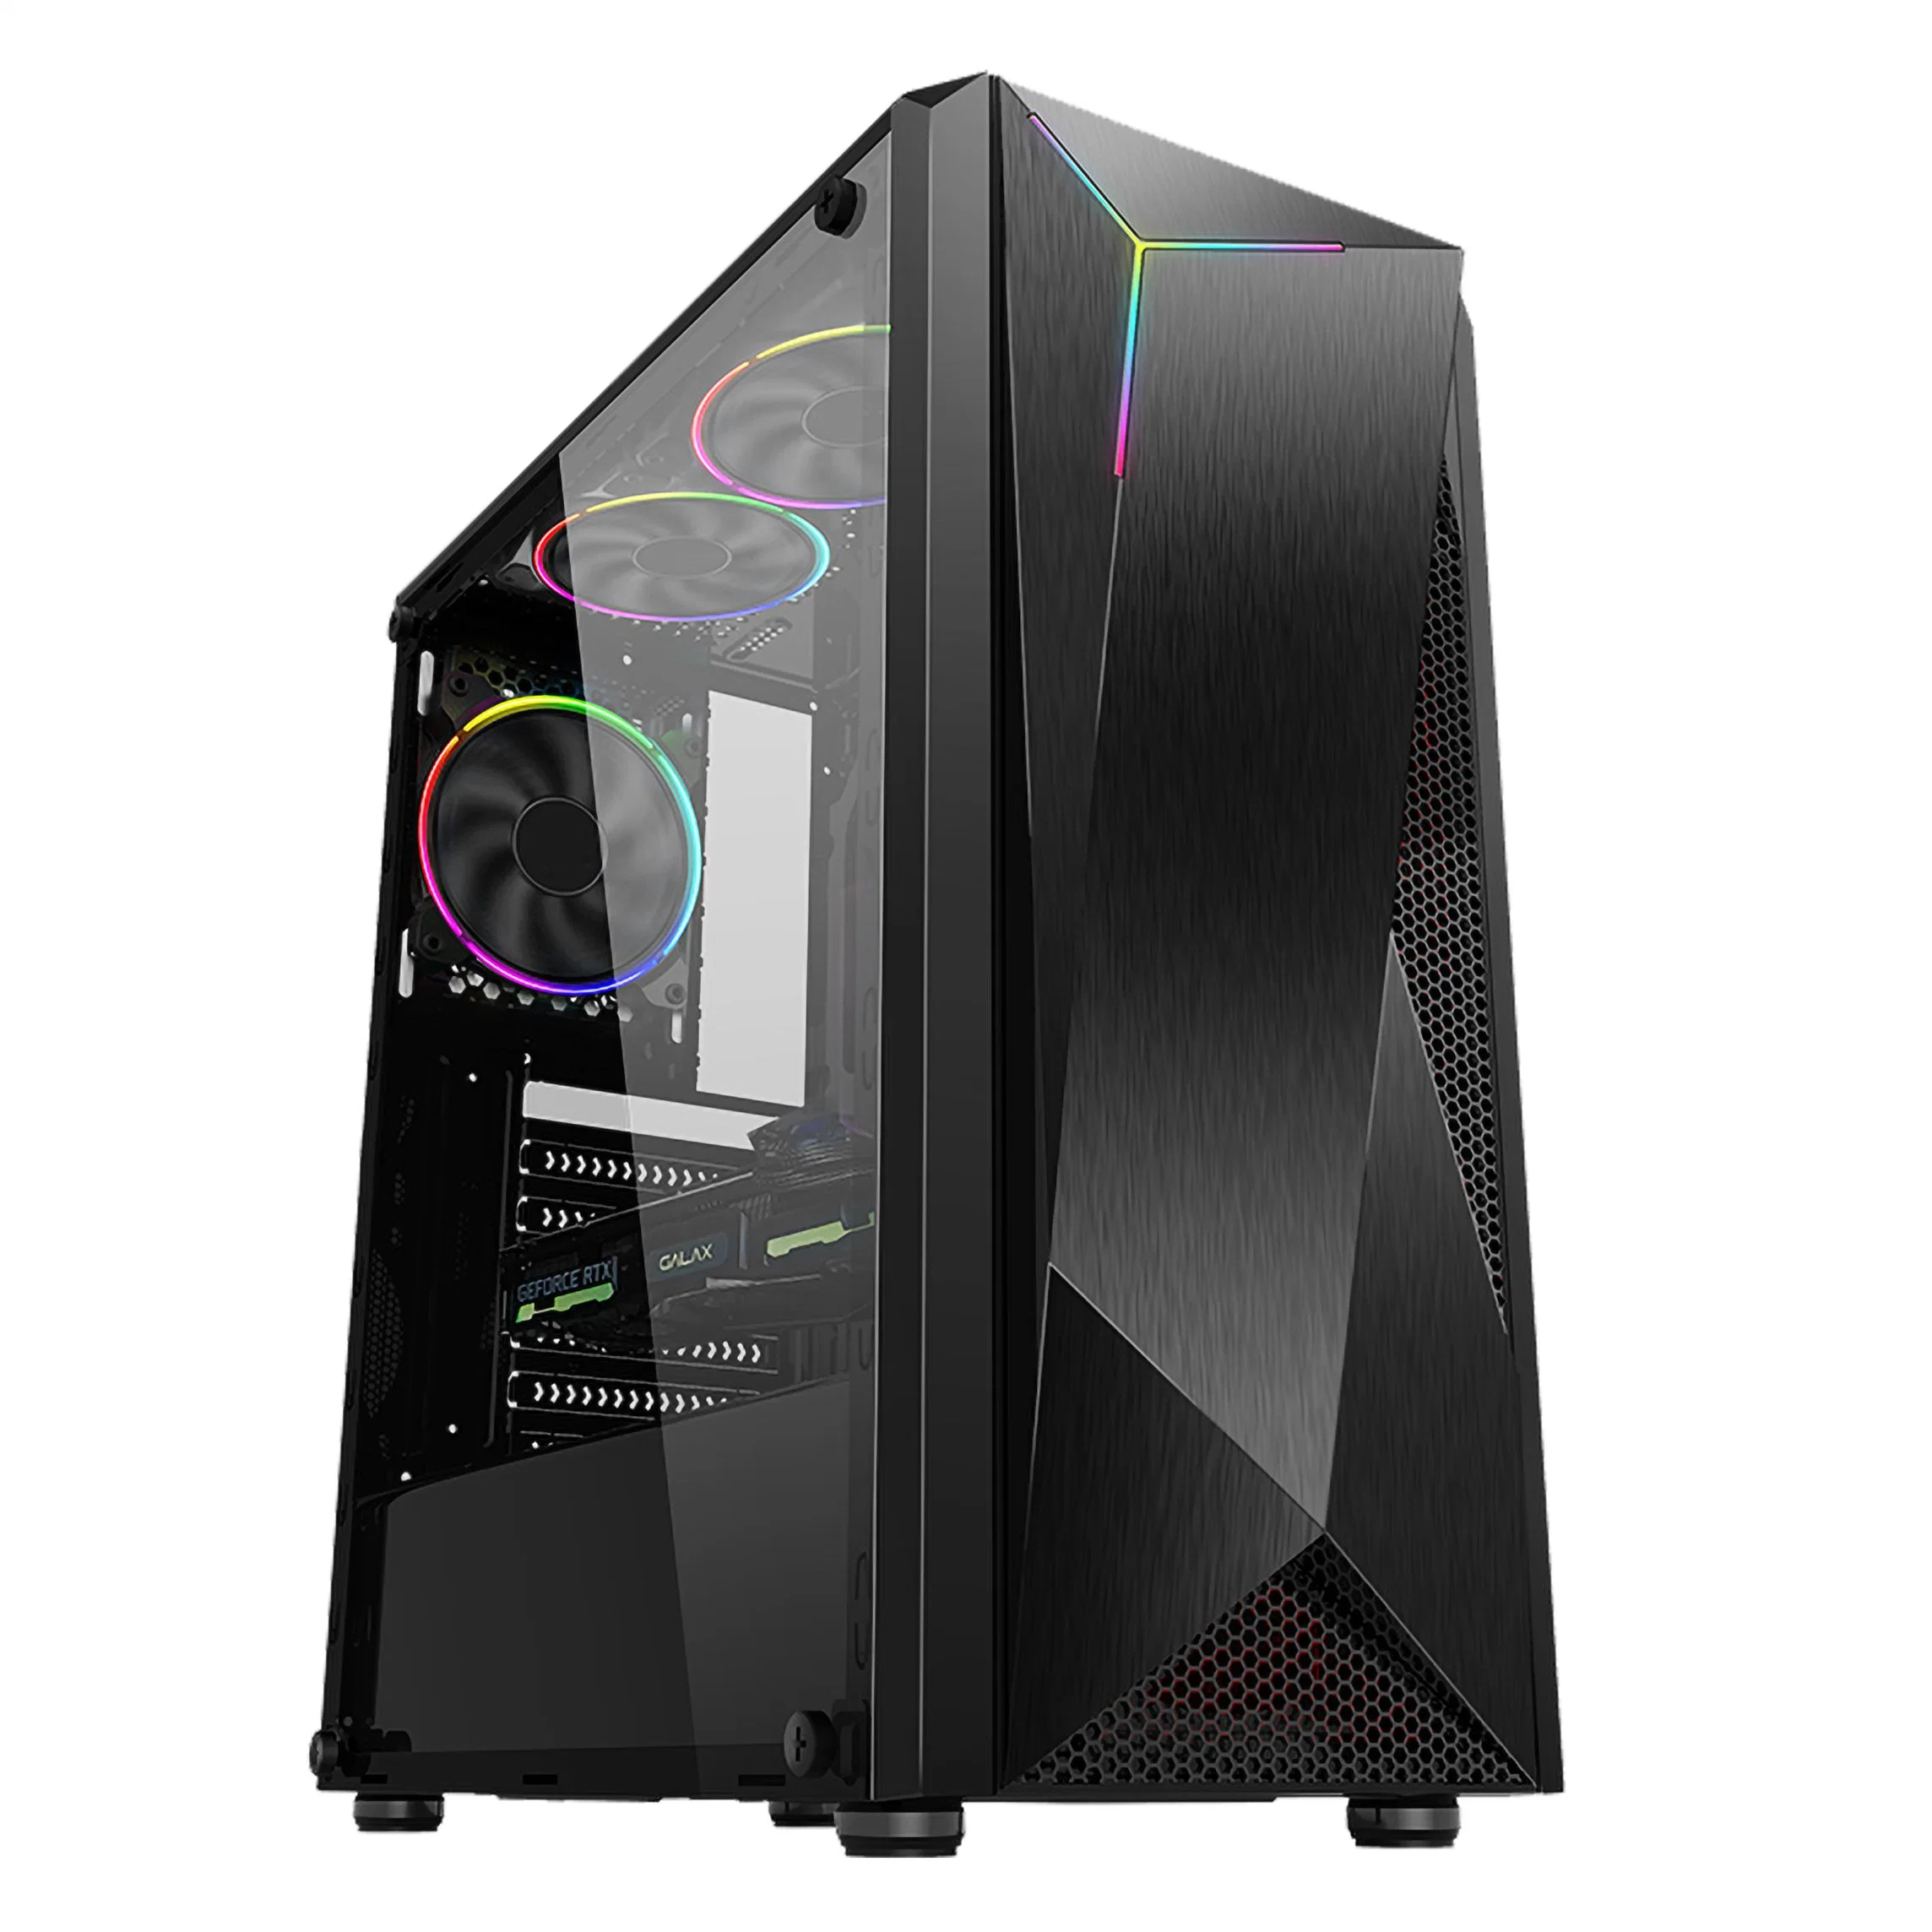 Table PC Computer Gaming Case Desktop ATX MID Tower Case